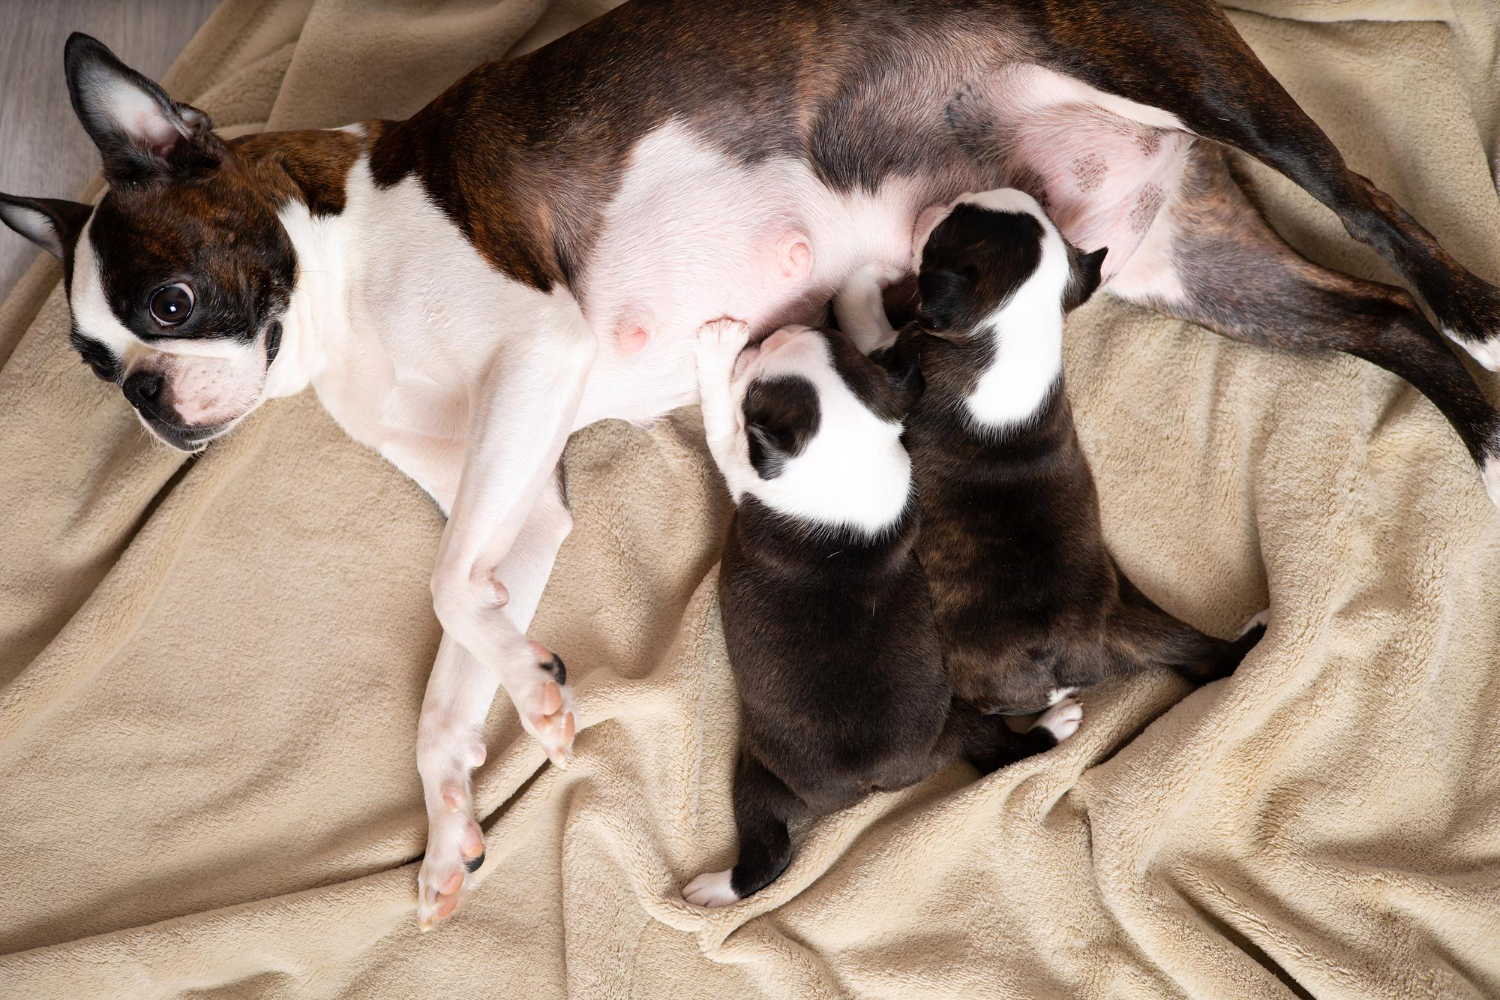 what supplements should i give my pregnant dog